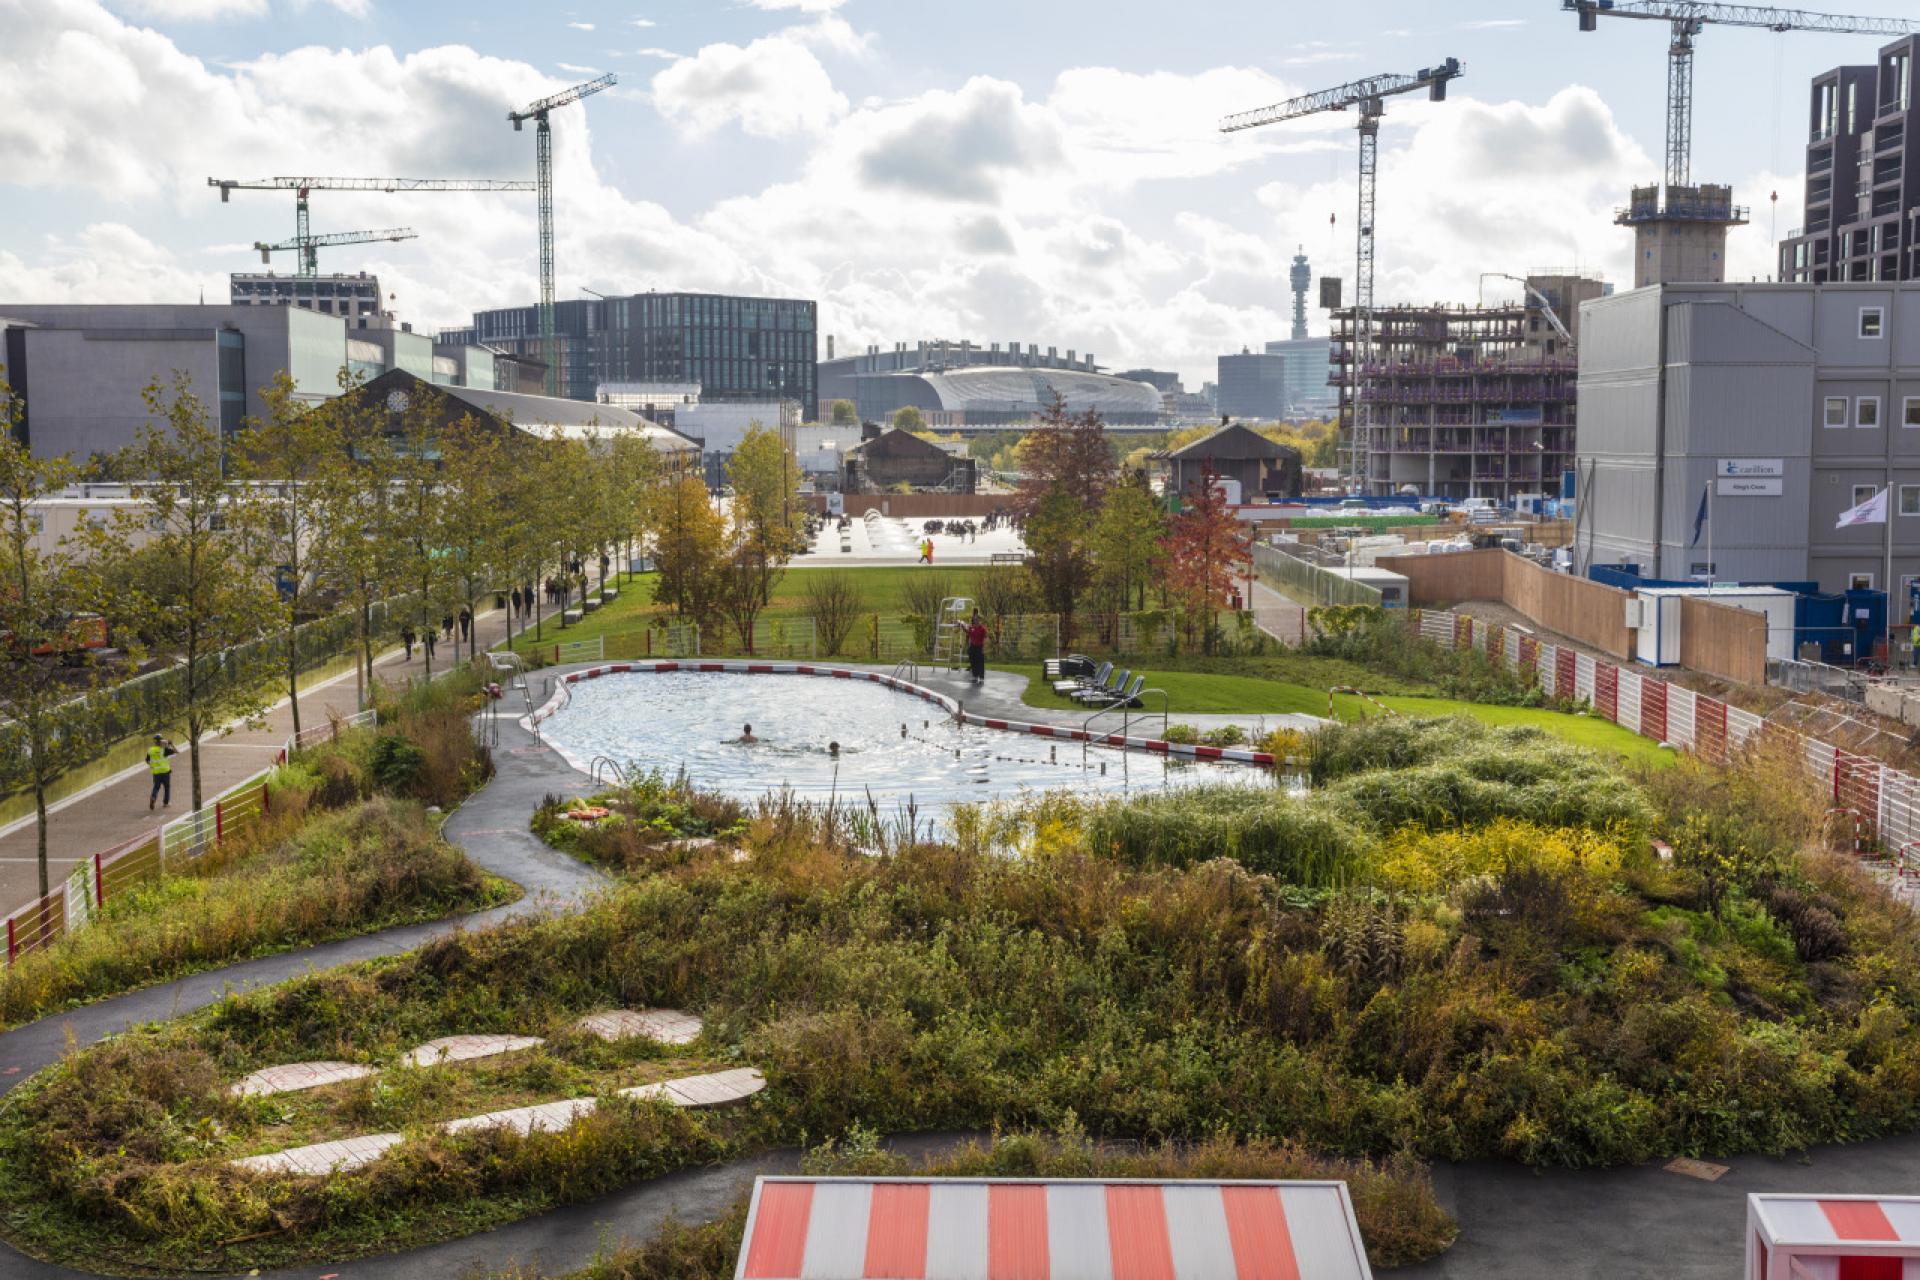 Of Soil and Water: King’s Cross Pond by Marjetica Potrč and Ooze | Photo © John Sturrock